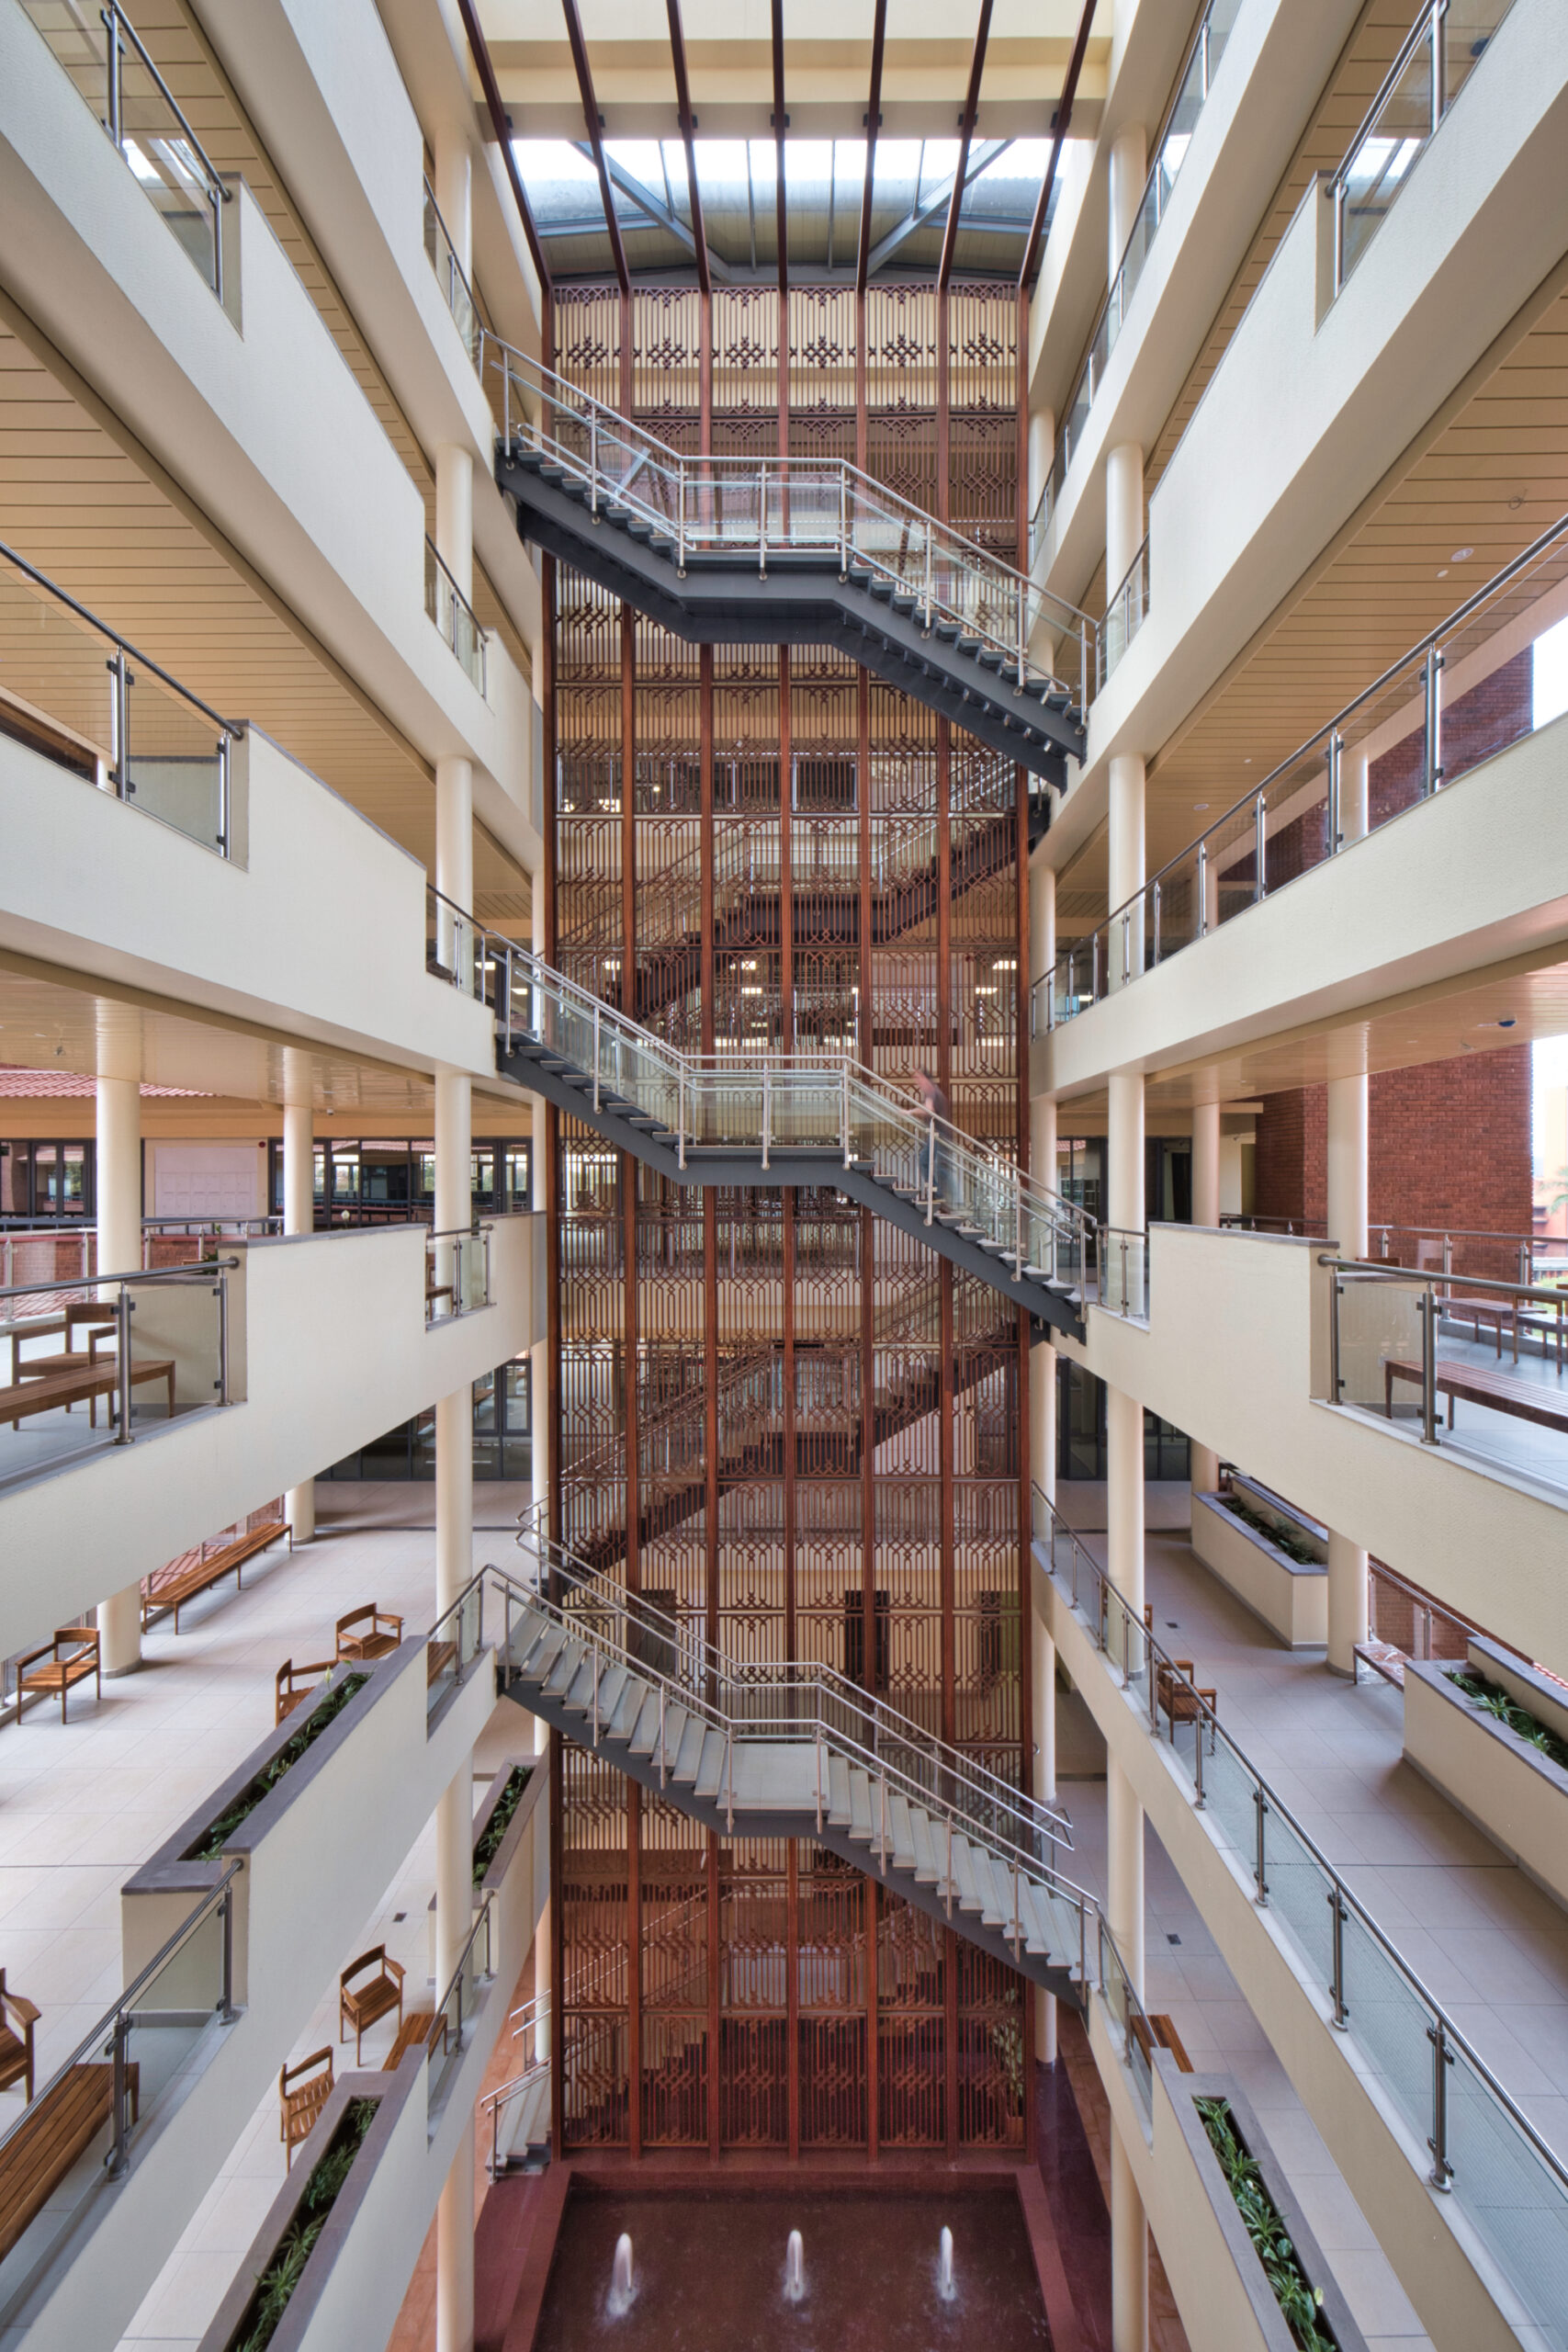 Atrium showing full seven stories of timber screen and stair